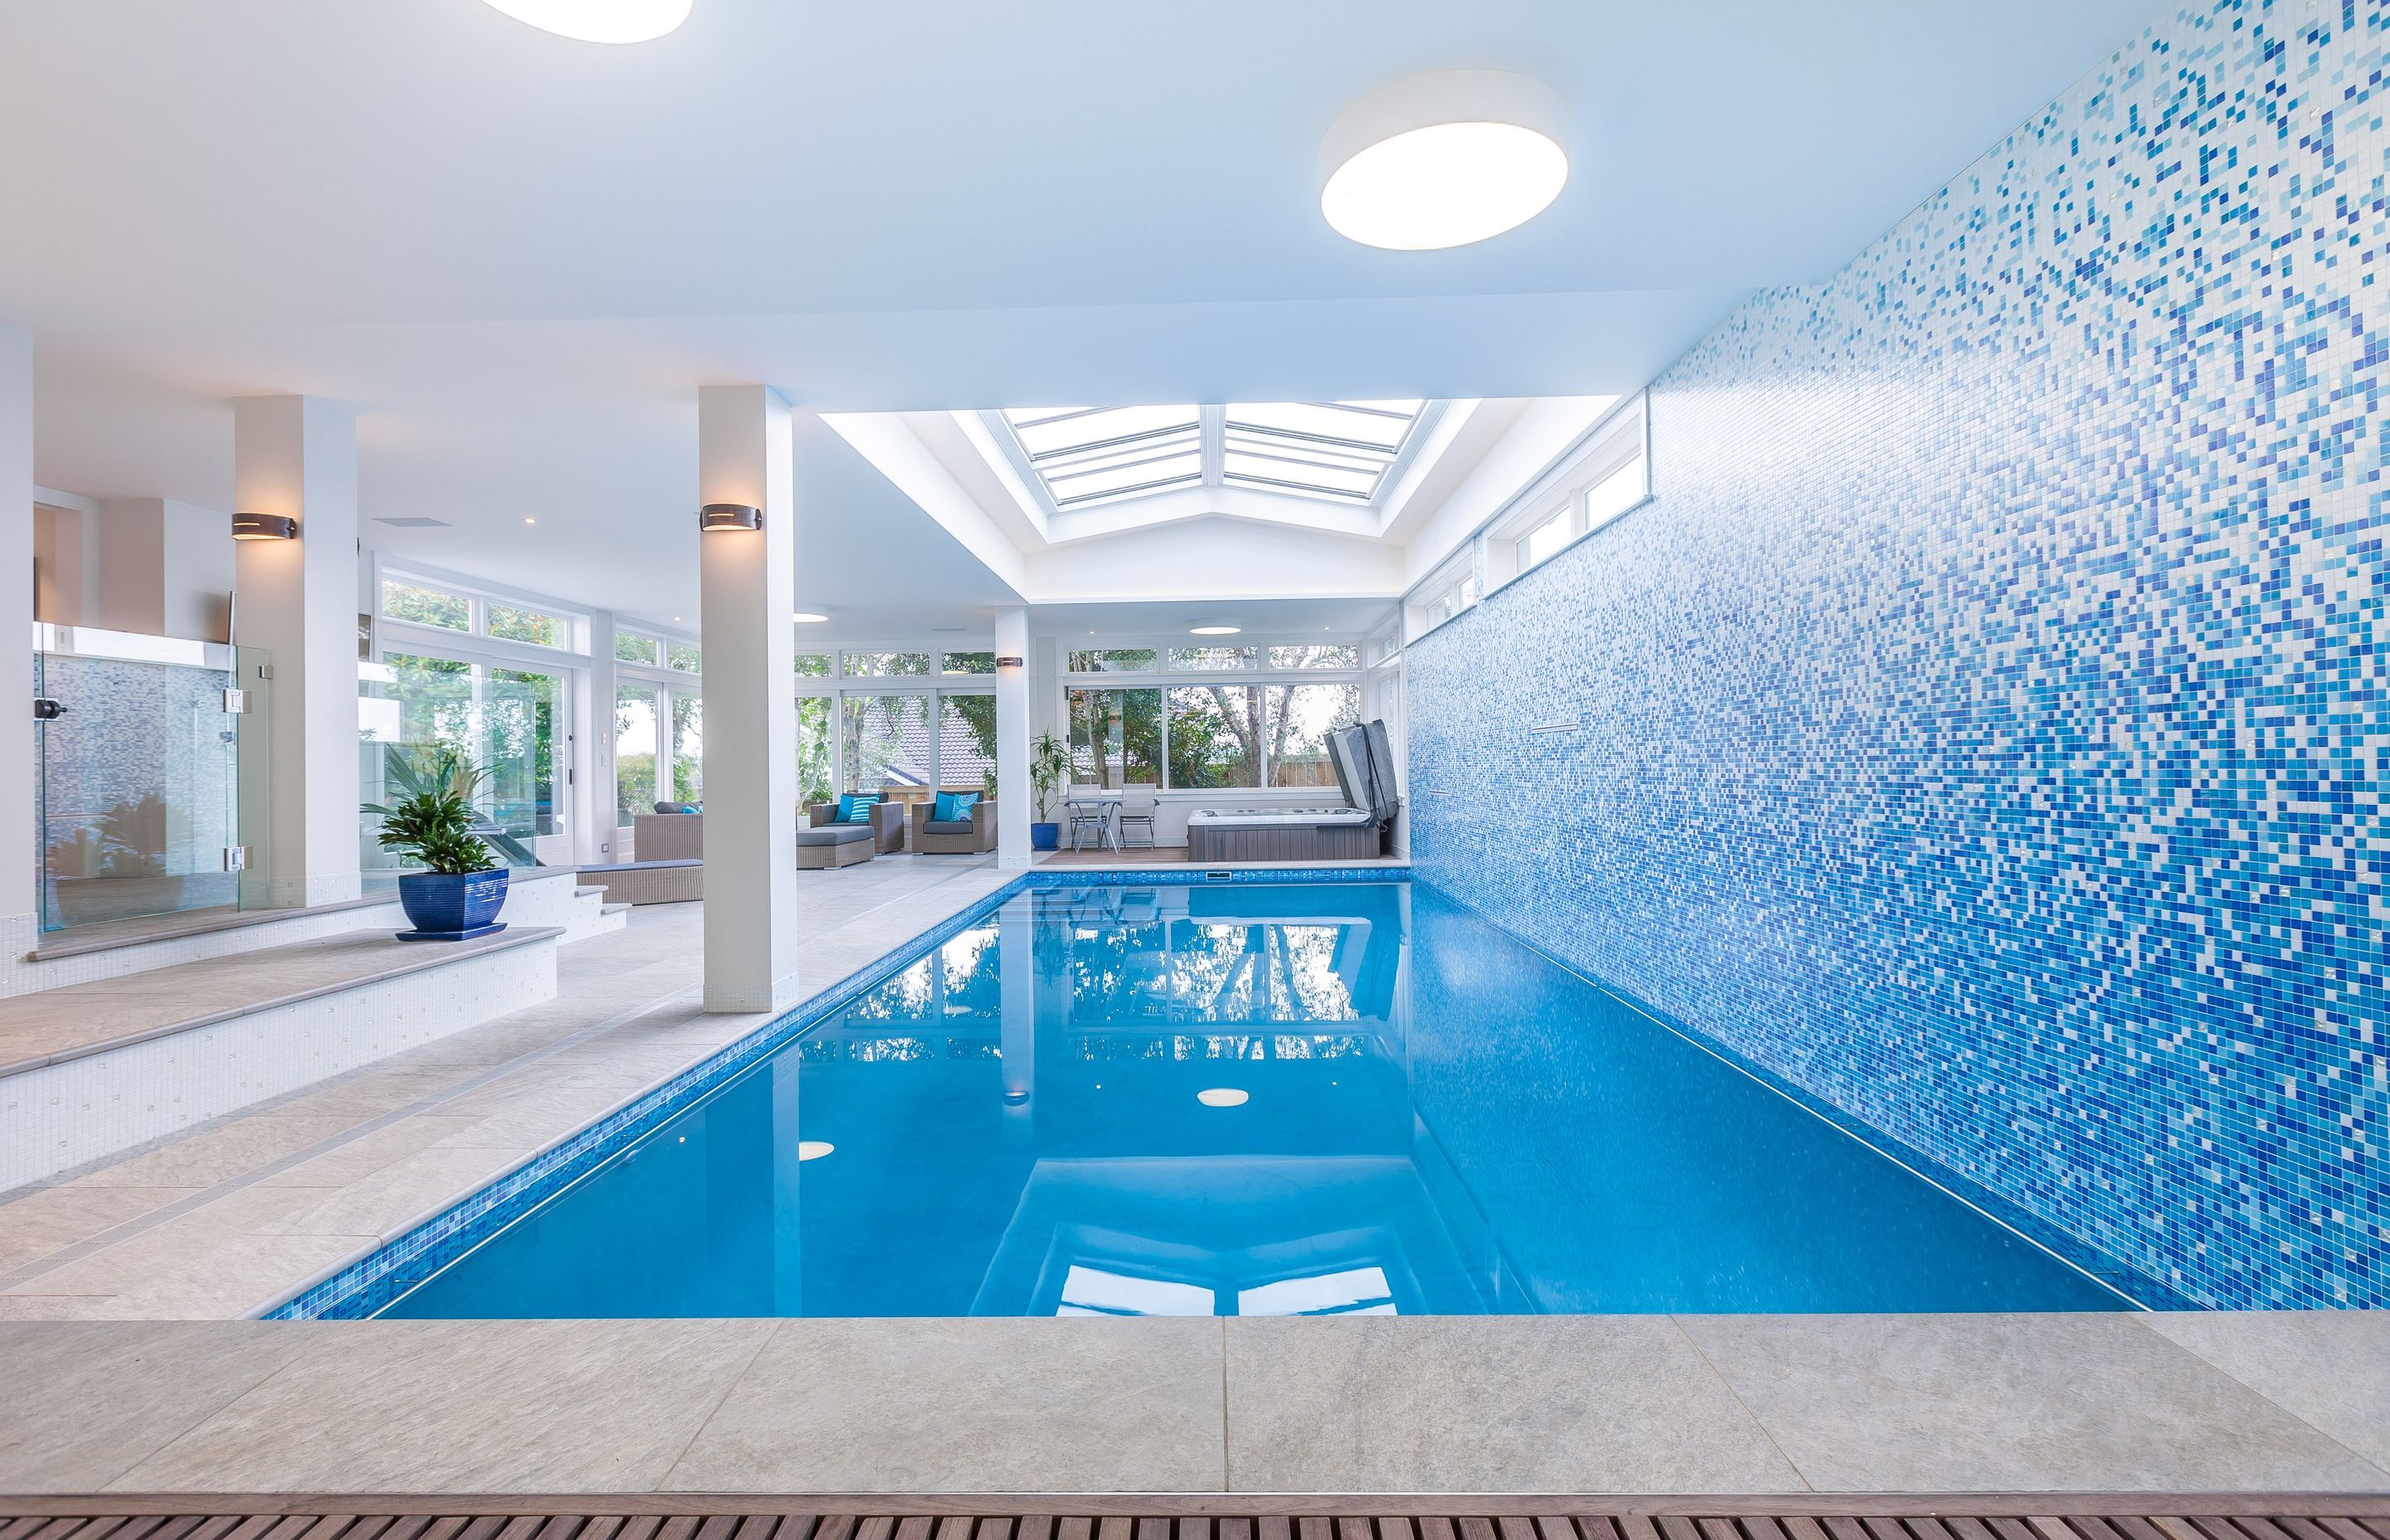 Indoor/outdoor pools are a way to ensure the pool area can be used in all seasons.